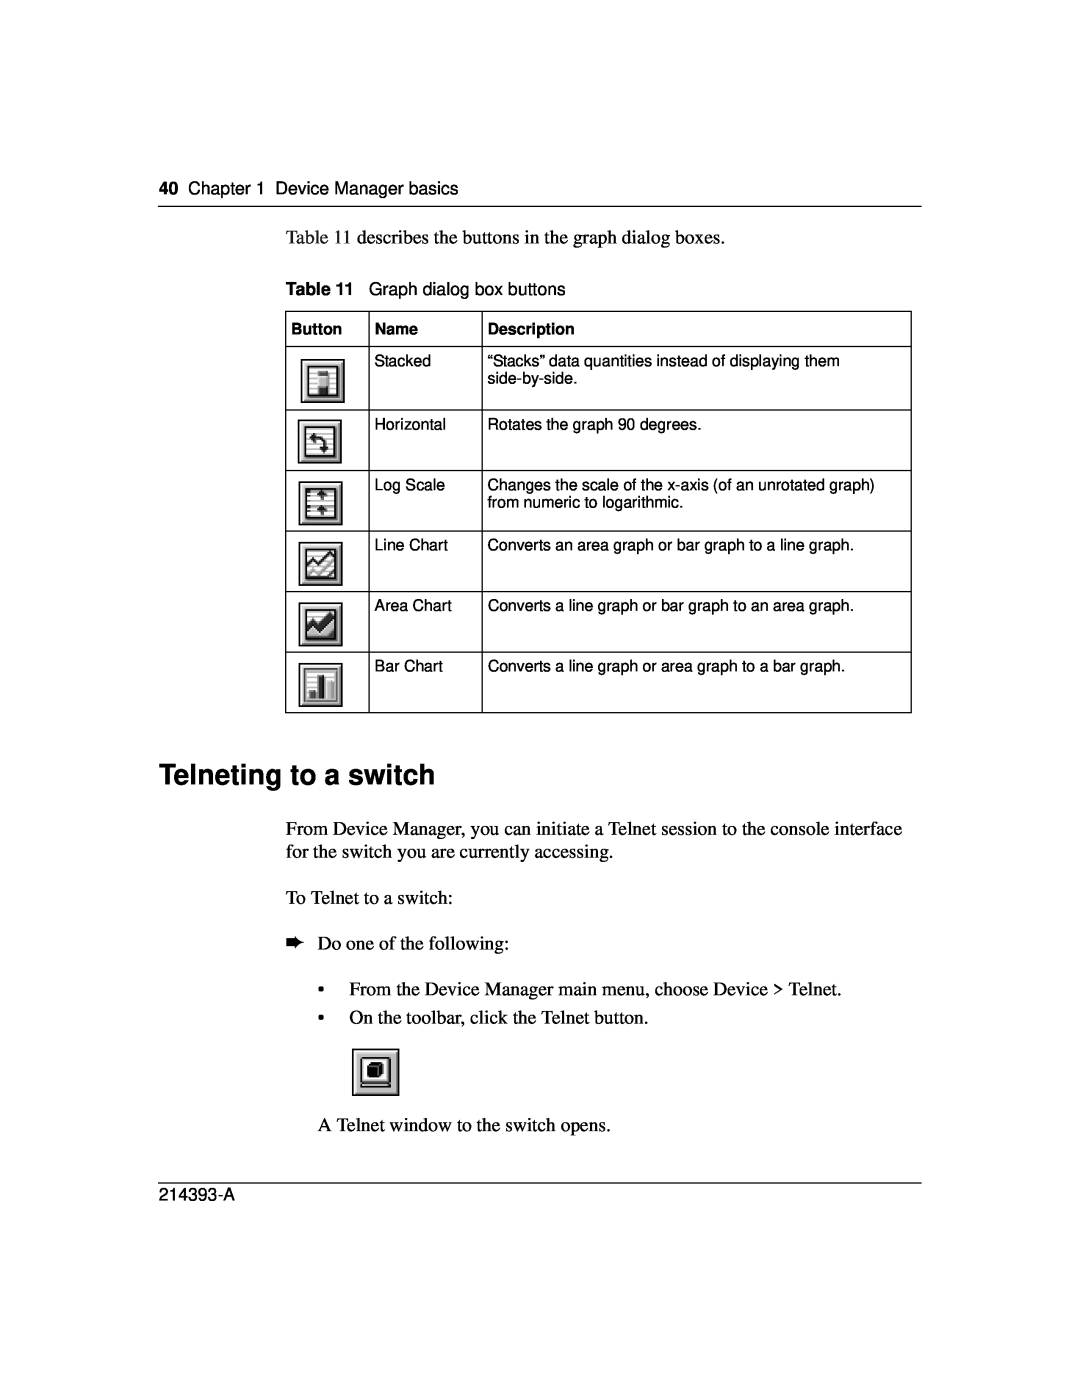 Nortel Networks 214393-A manual Telneting to a switch 